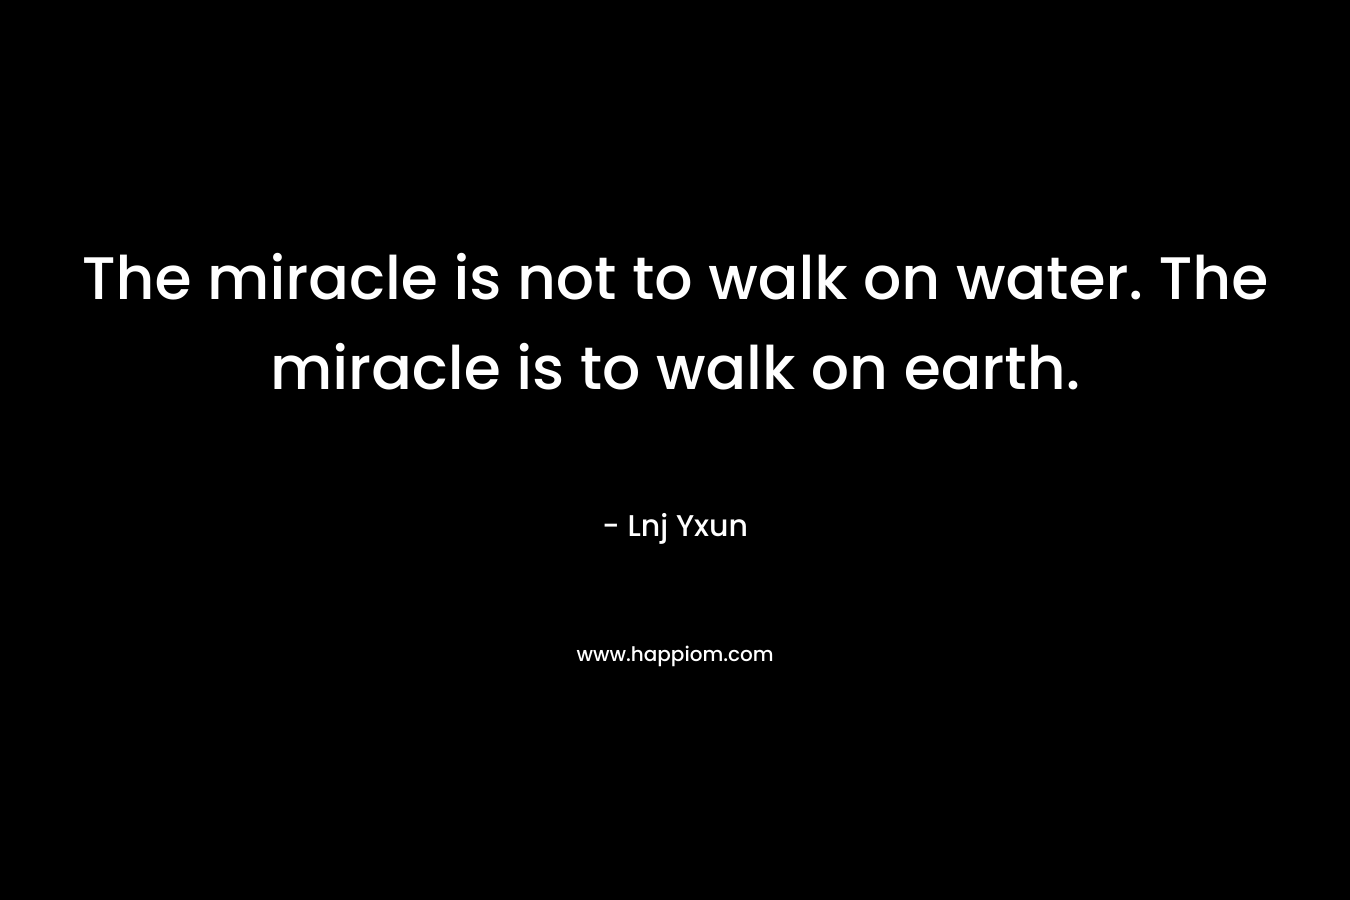 The miracle is not to walk on water. The miracle is to walk on earth.